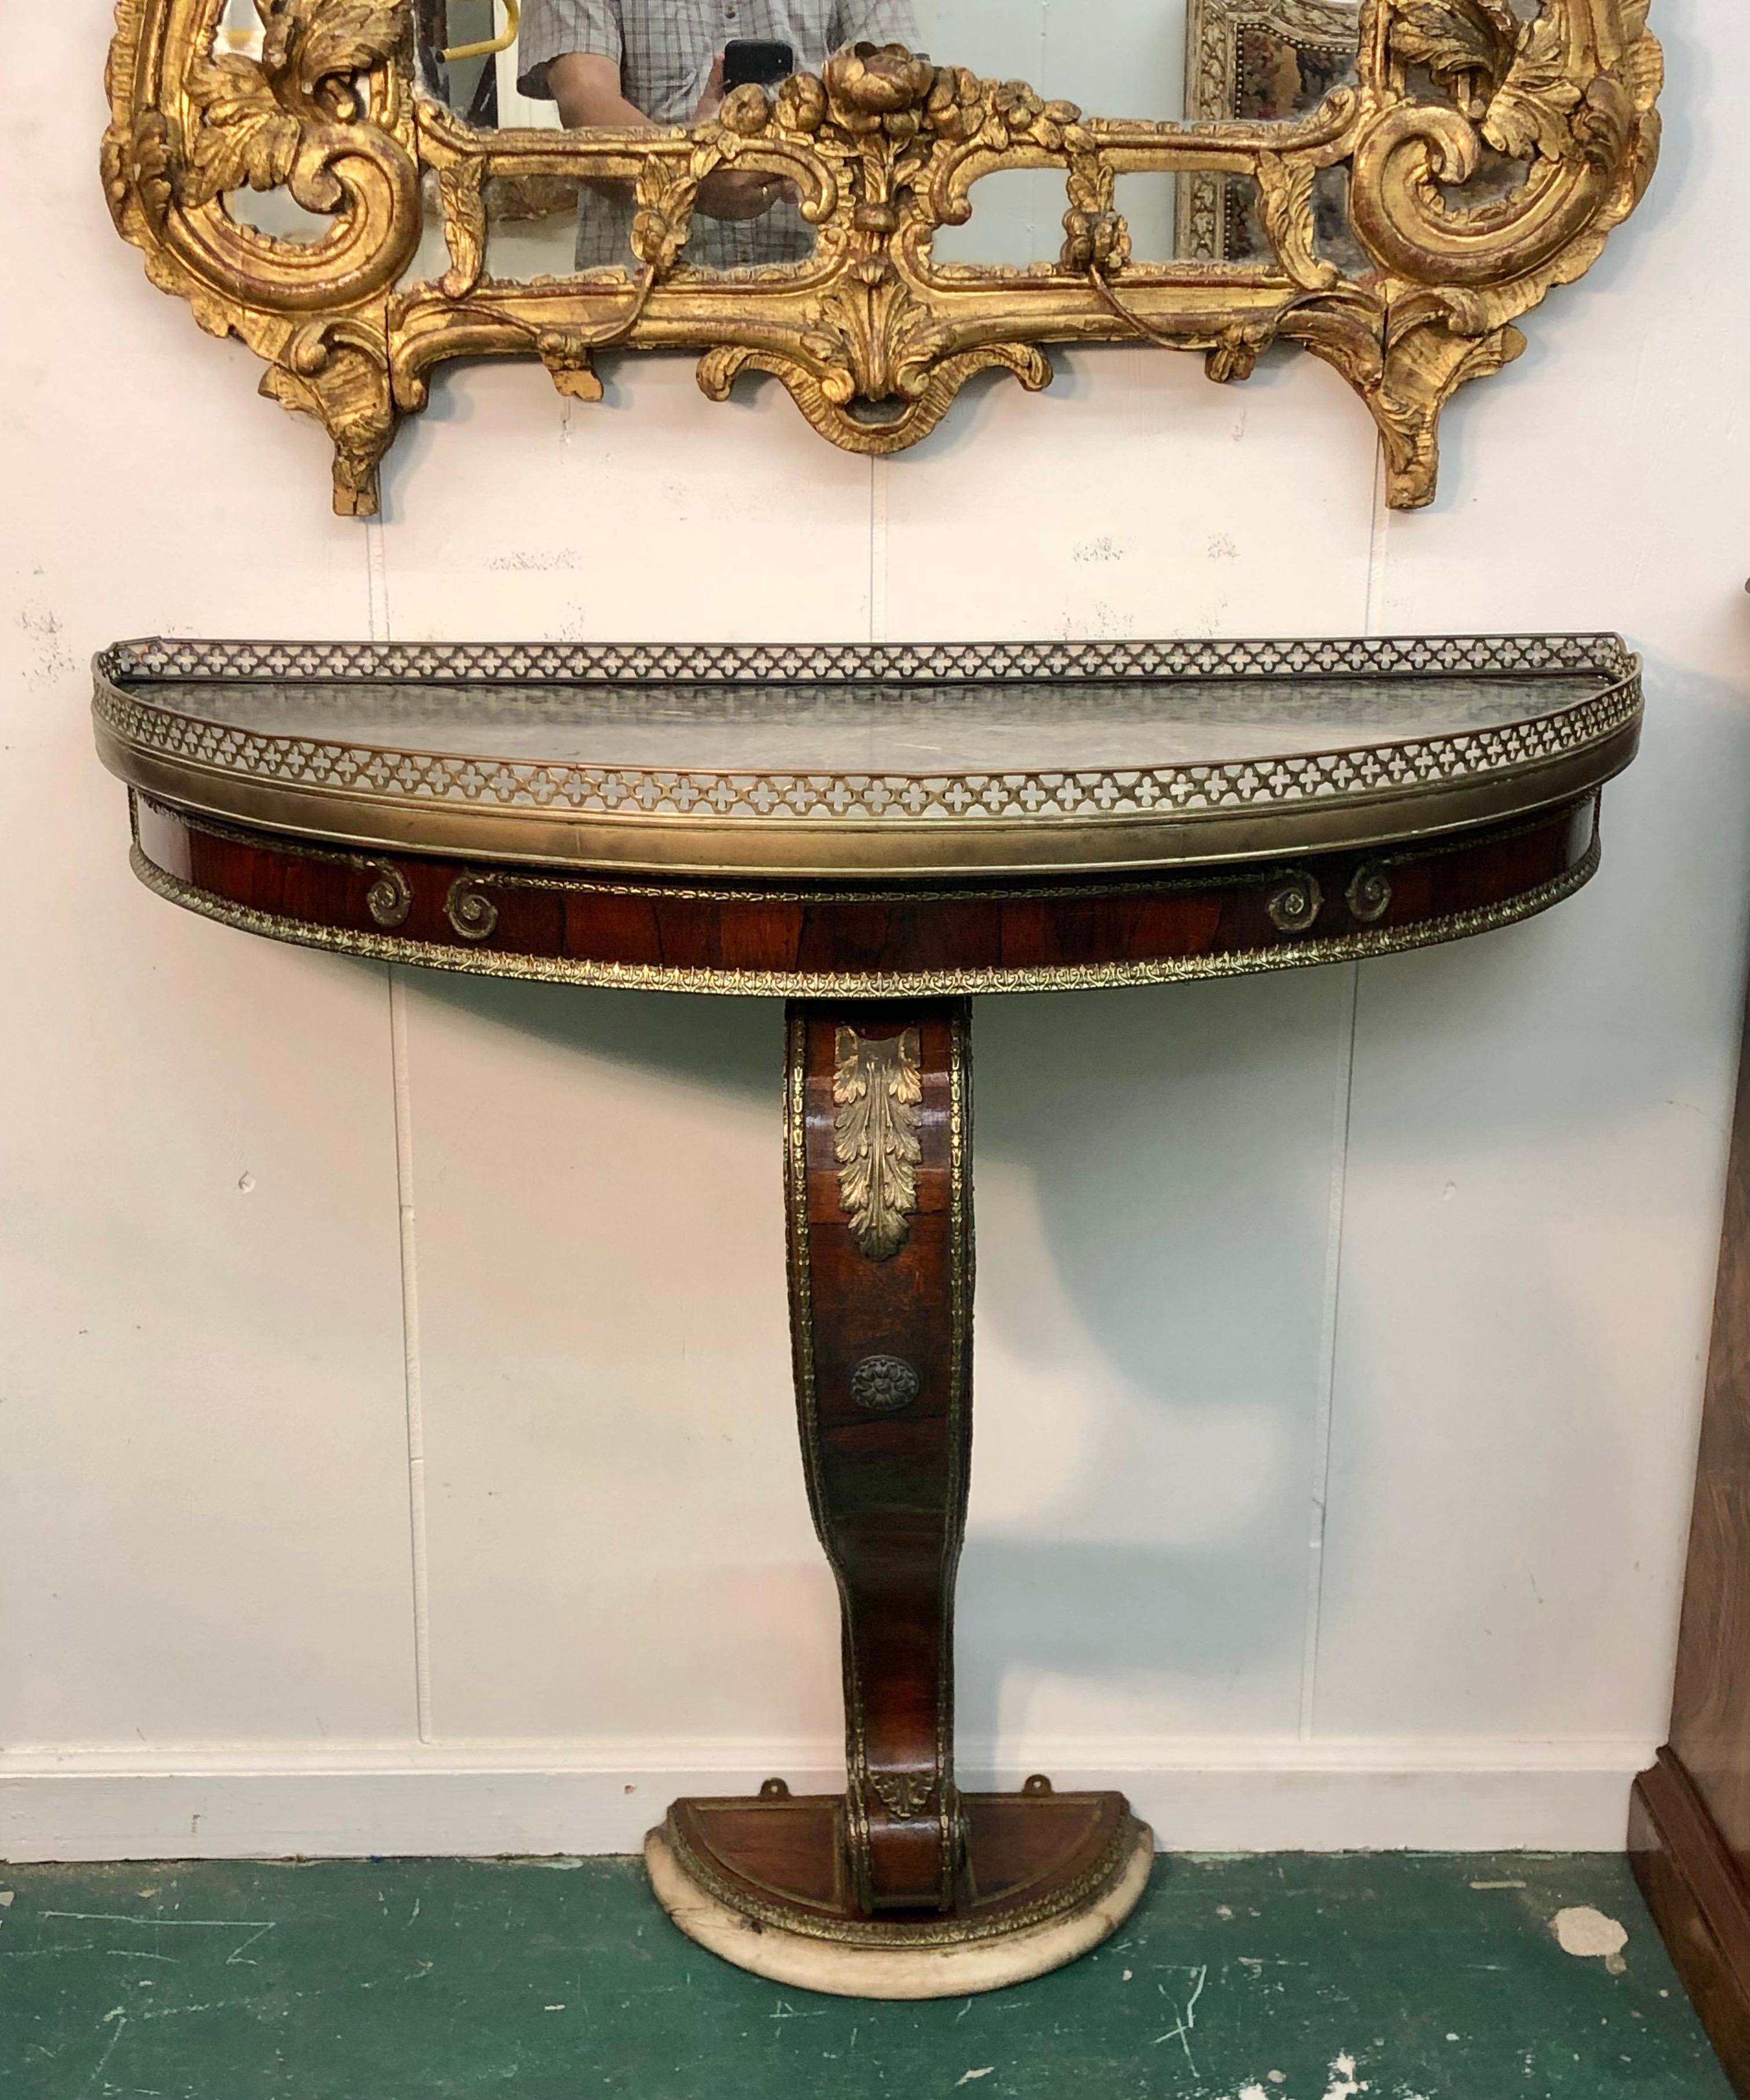 Directoire Period Marble Top Rosewood French Console with bronze mounts from the Late 18th Century. The Directoire Console has a hand chiseled marble top mounted with a bronze gallery. The Rosewood console has exceptional chiseled bronze mounts.